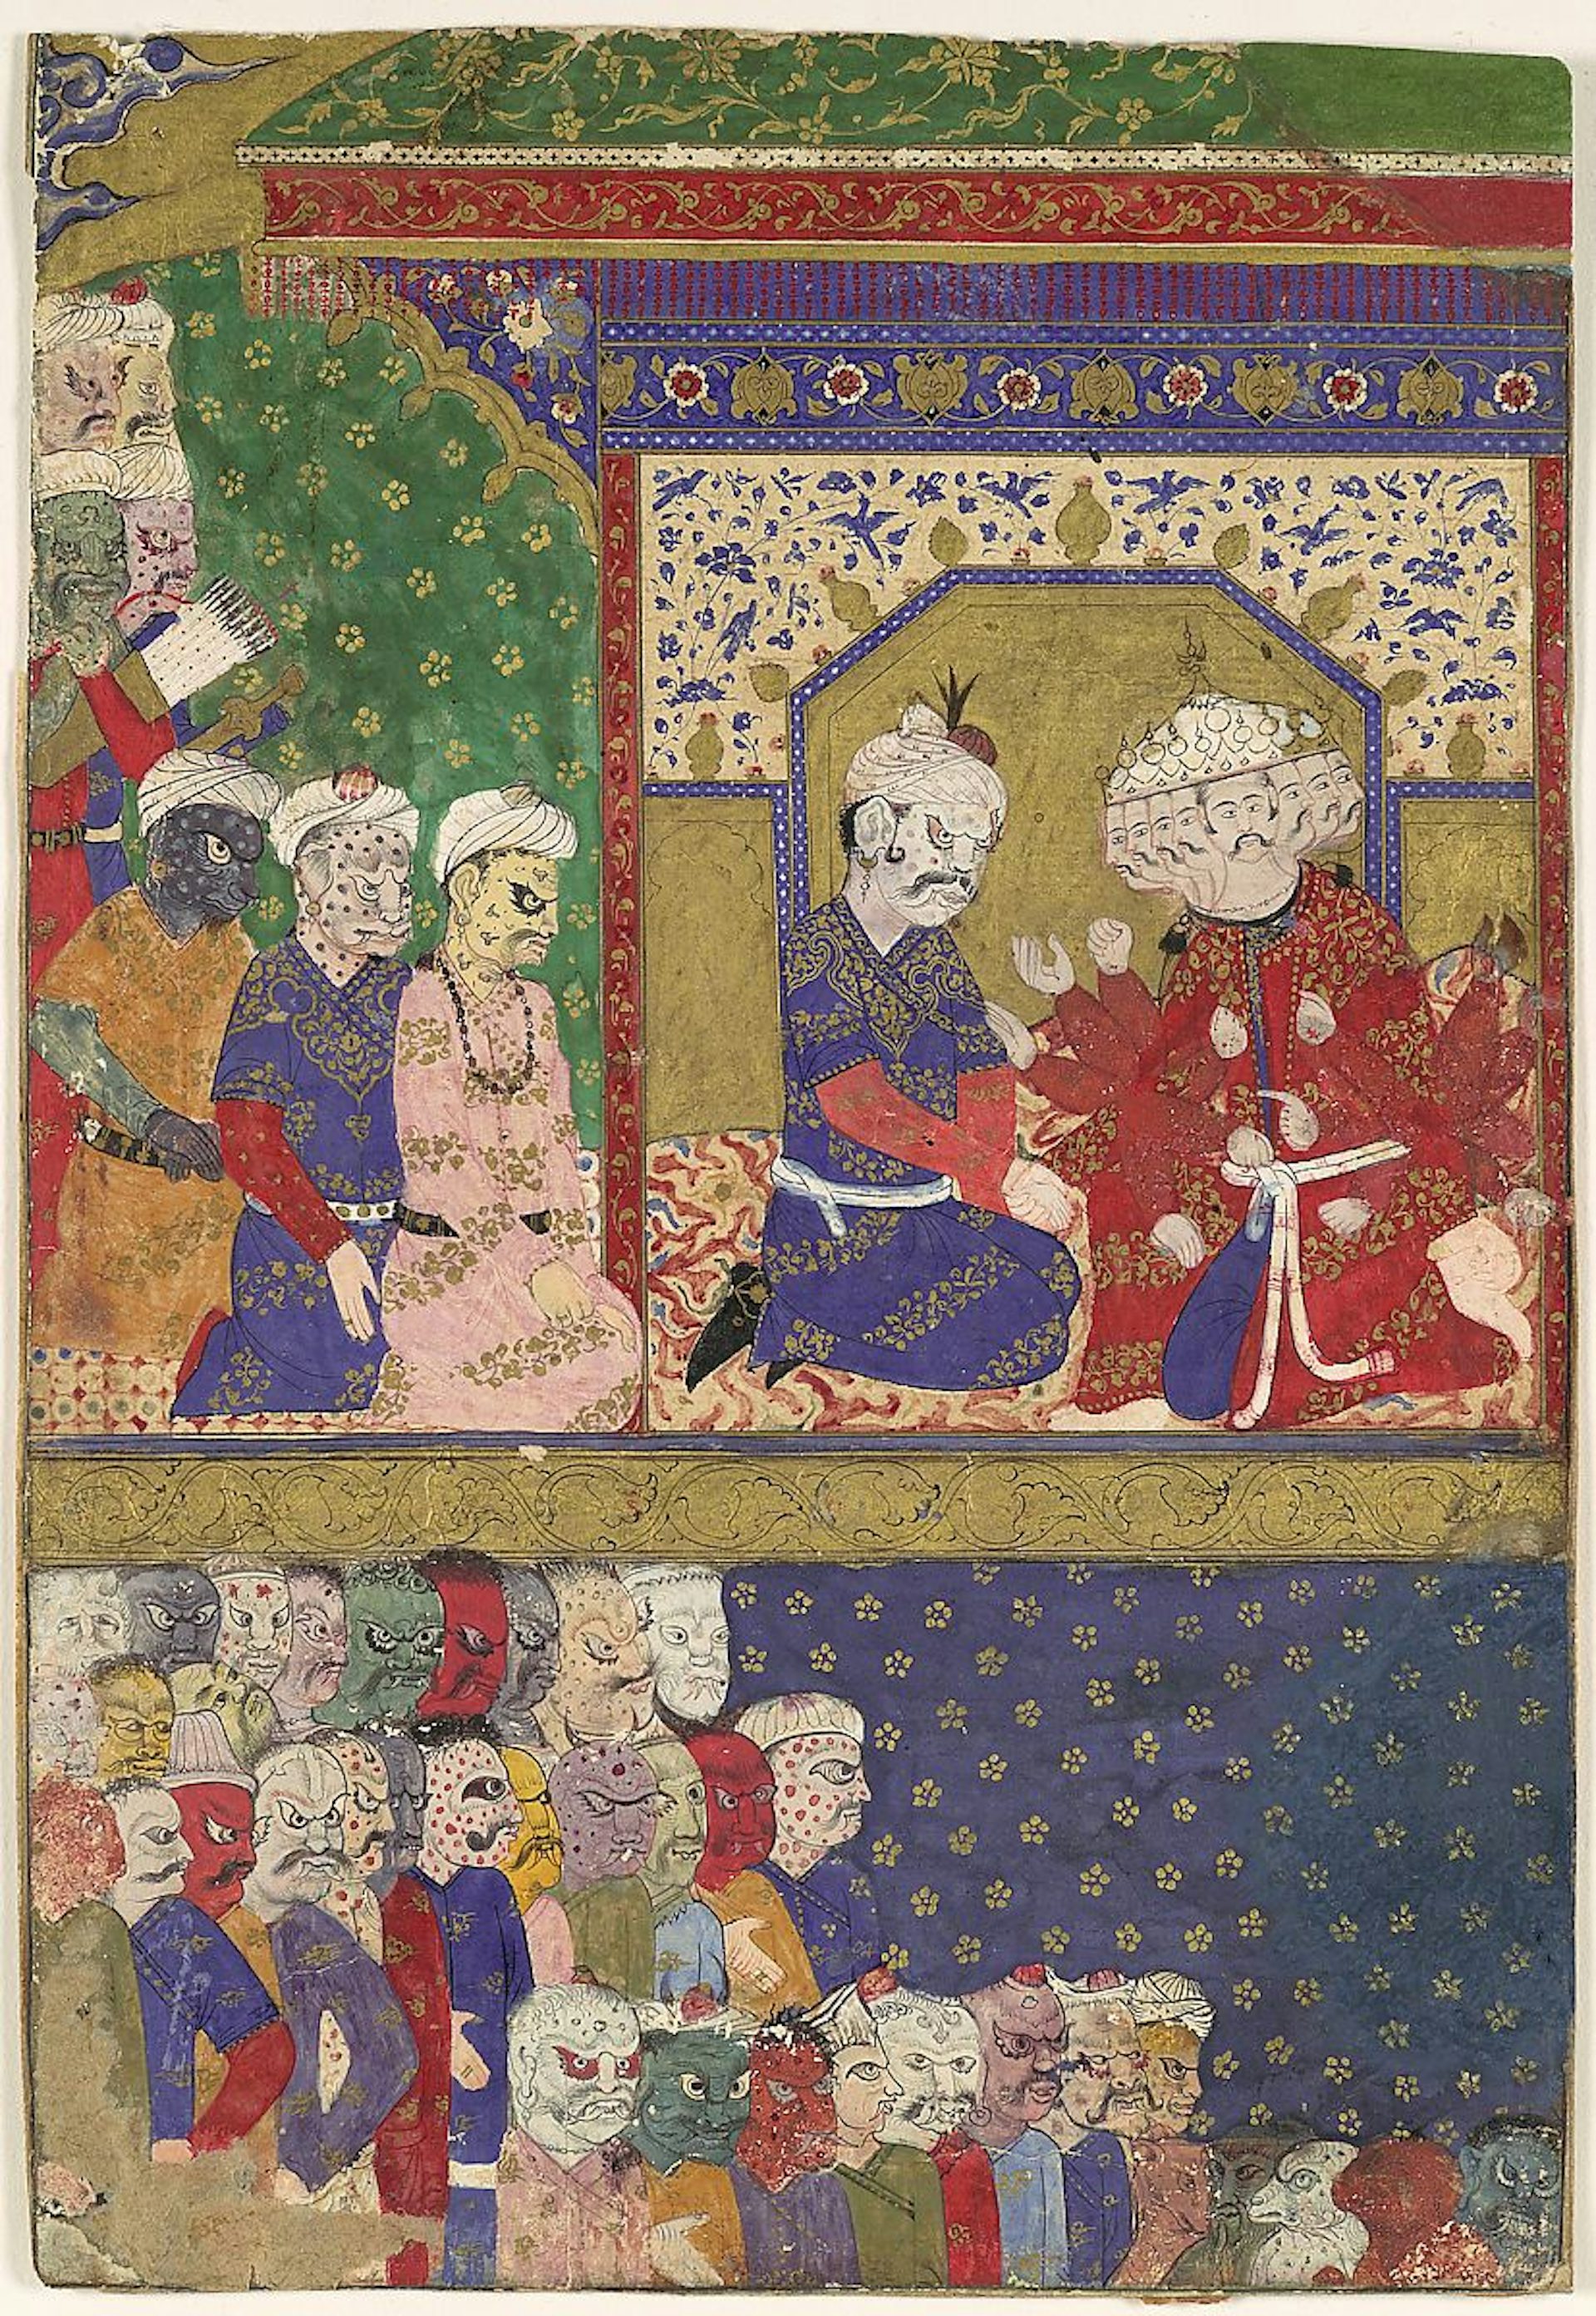 Folio of Demon King Ravana and his Courtiers Mughal Style ca 1605